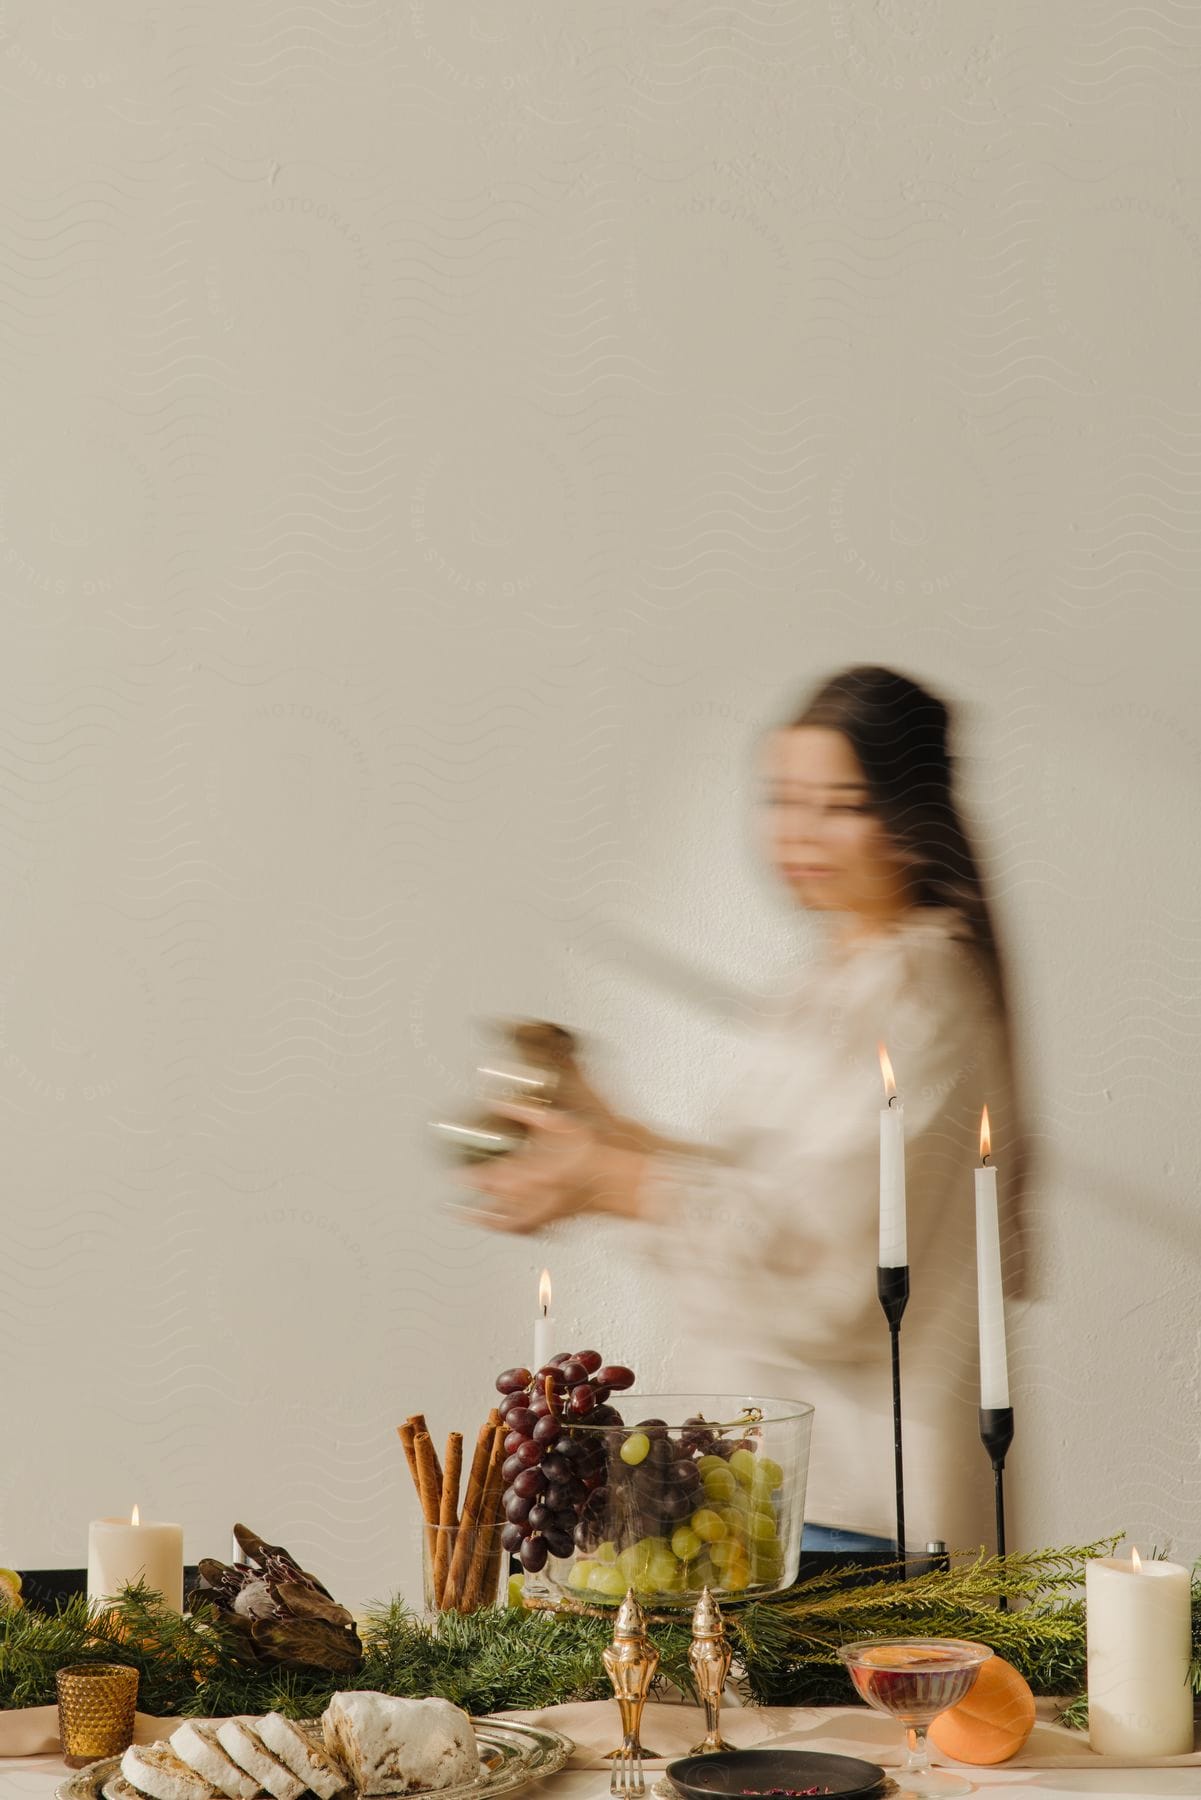 Blurry motion of a woman carrying a gold dish to a candlelit brunch table.